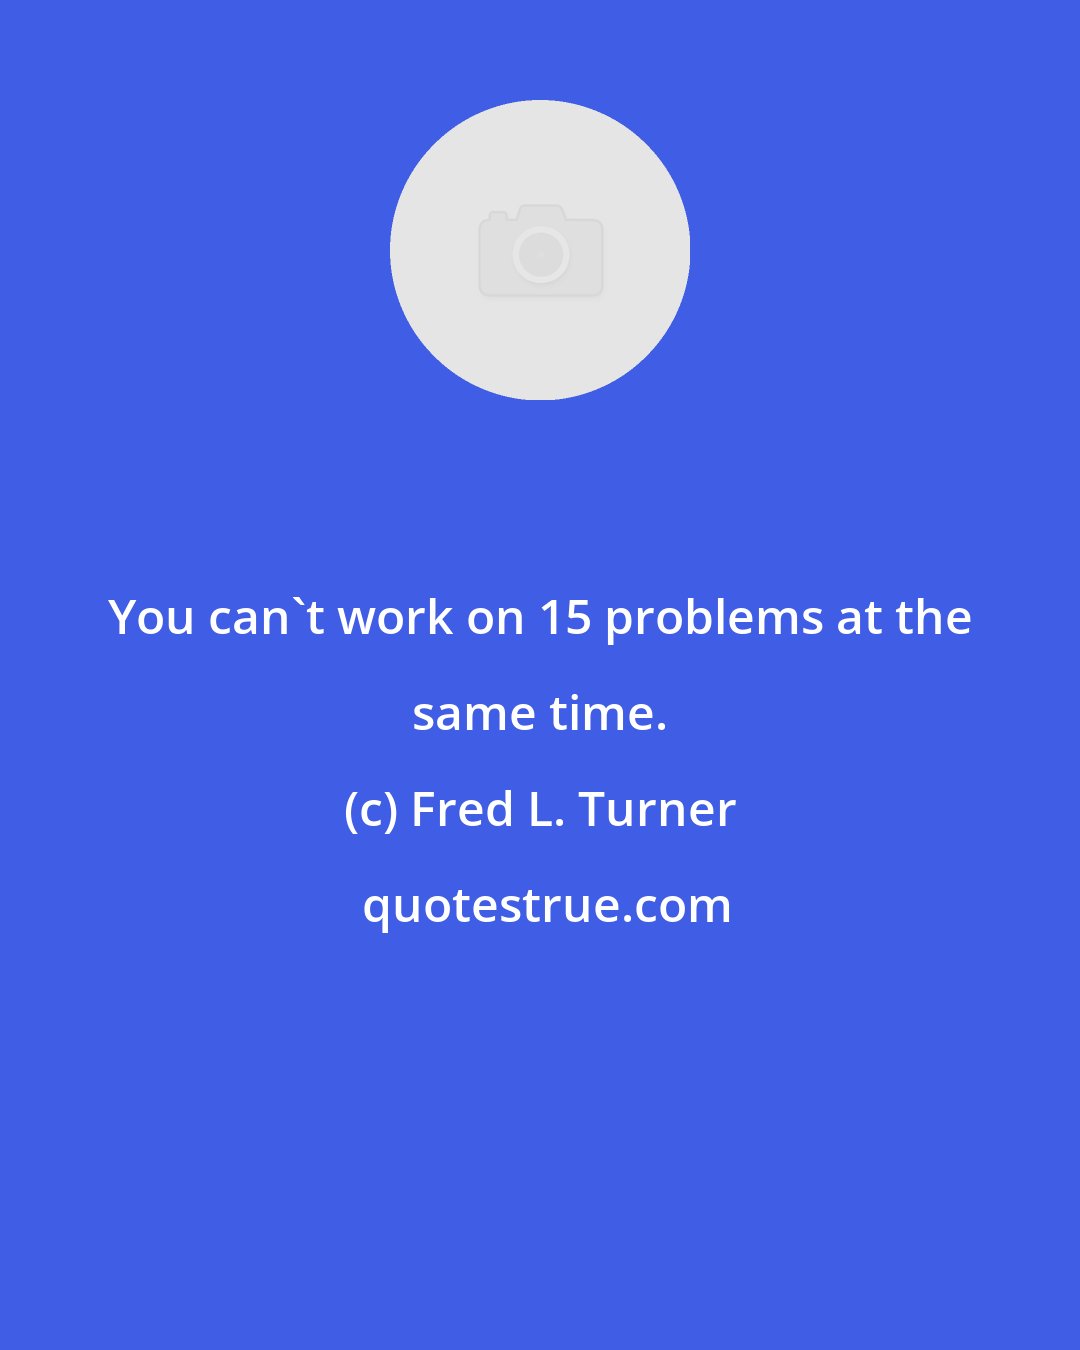 Fred L. Turner: You can't work on 15 problems at the same time.